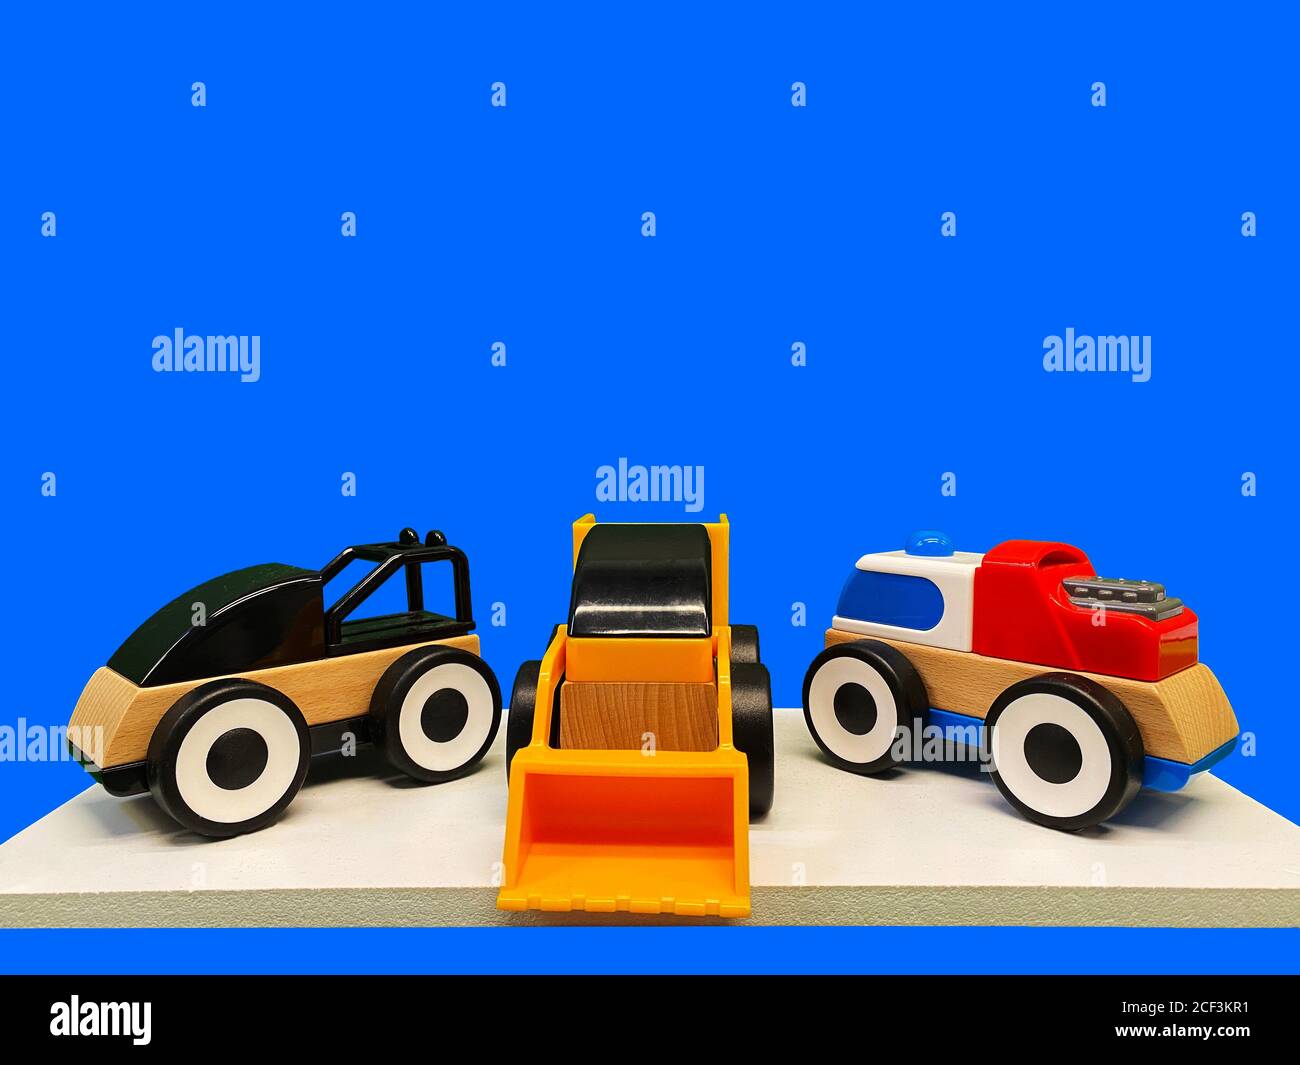 Three toy multicolored cars made of plastic and wood on a blue background Stock Photo